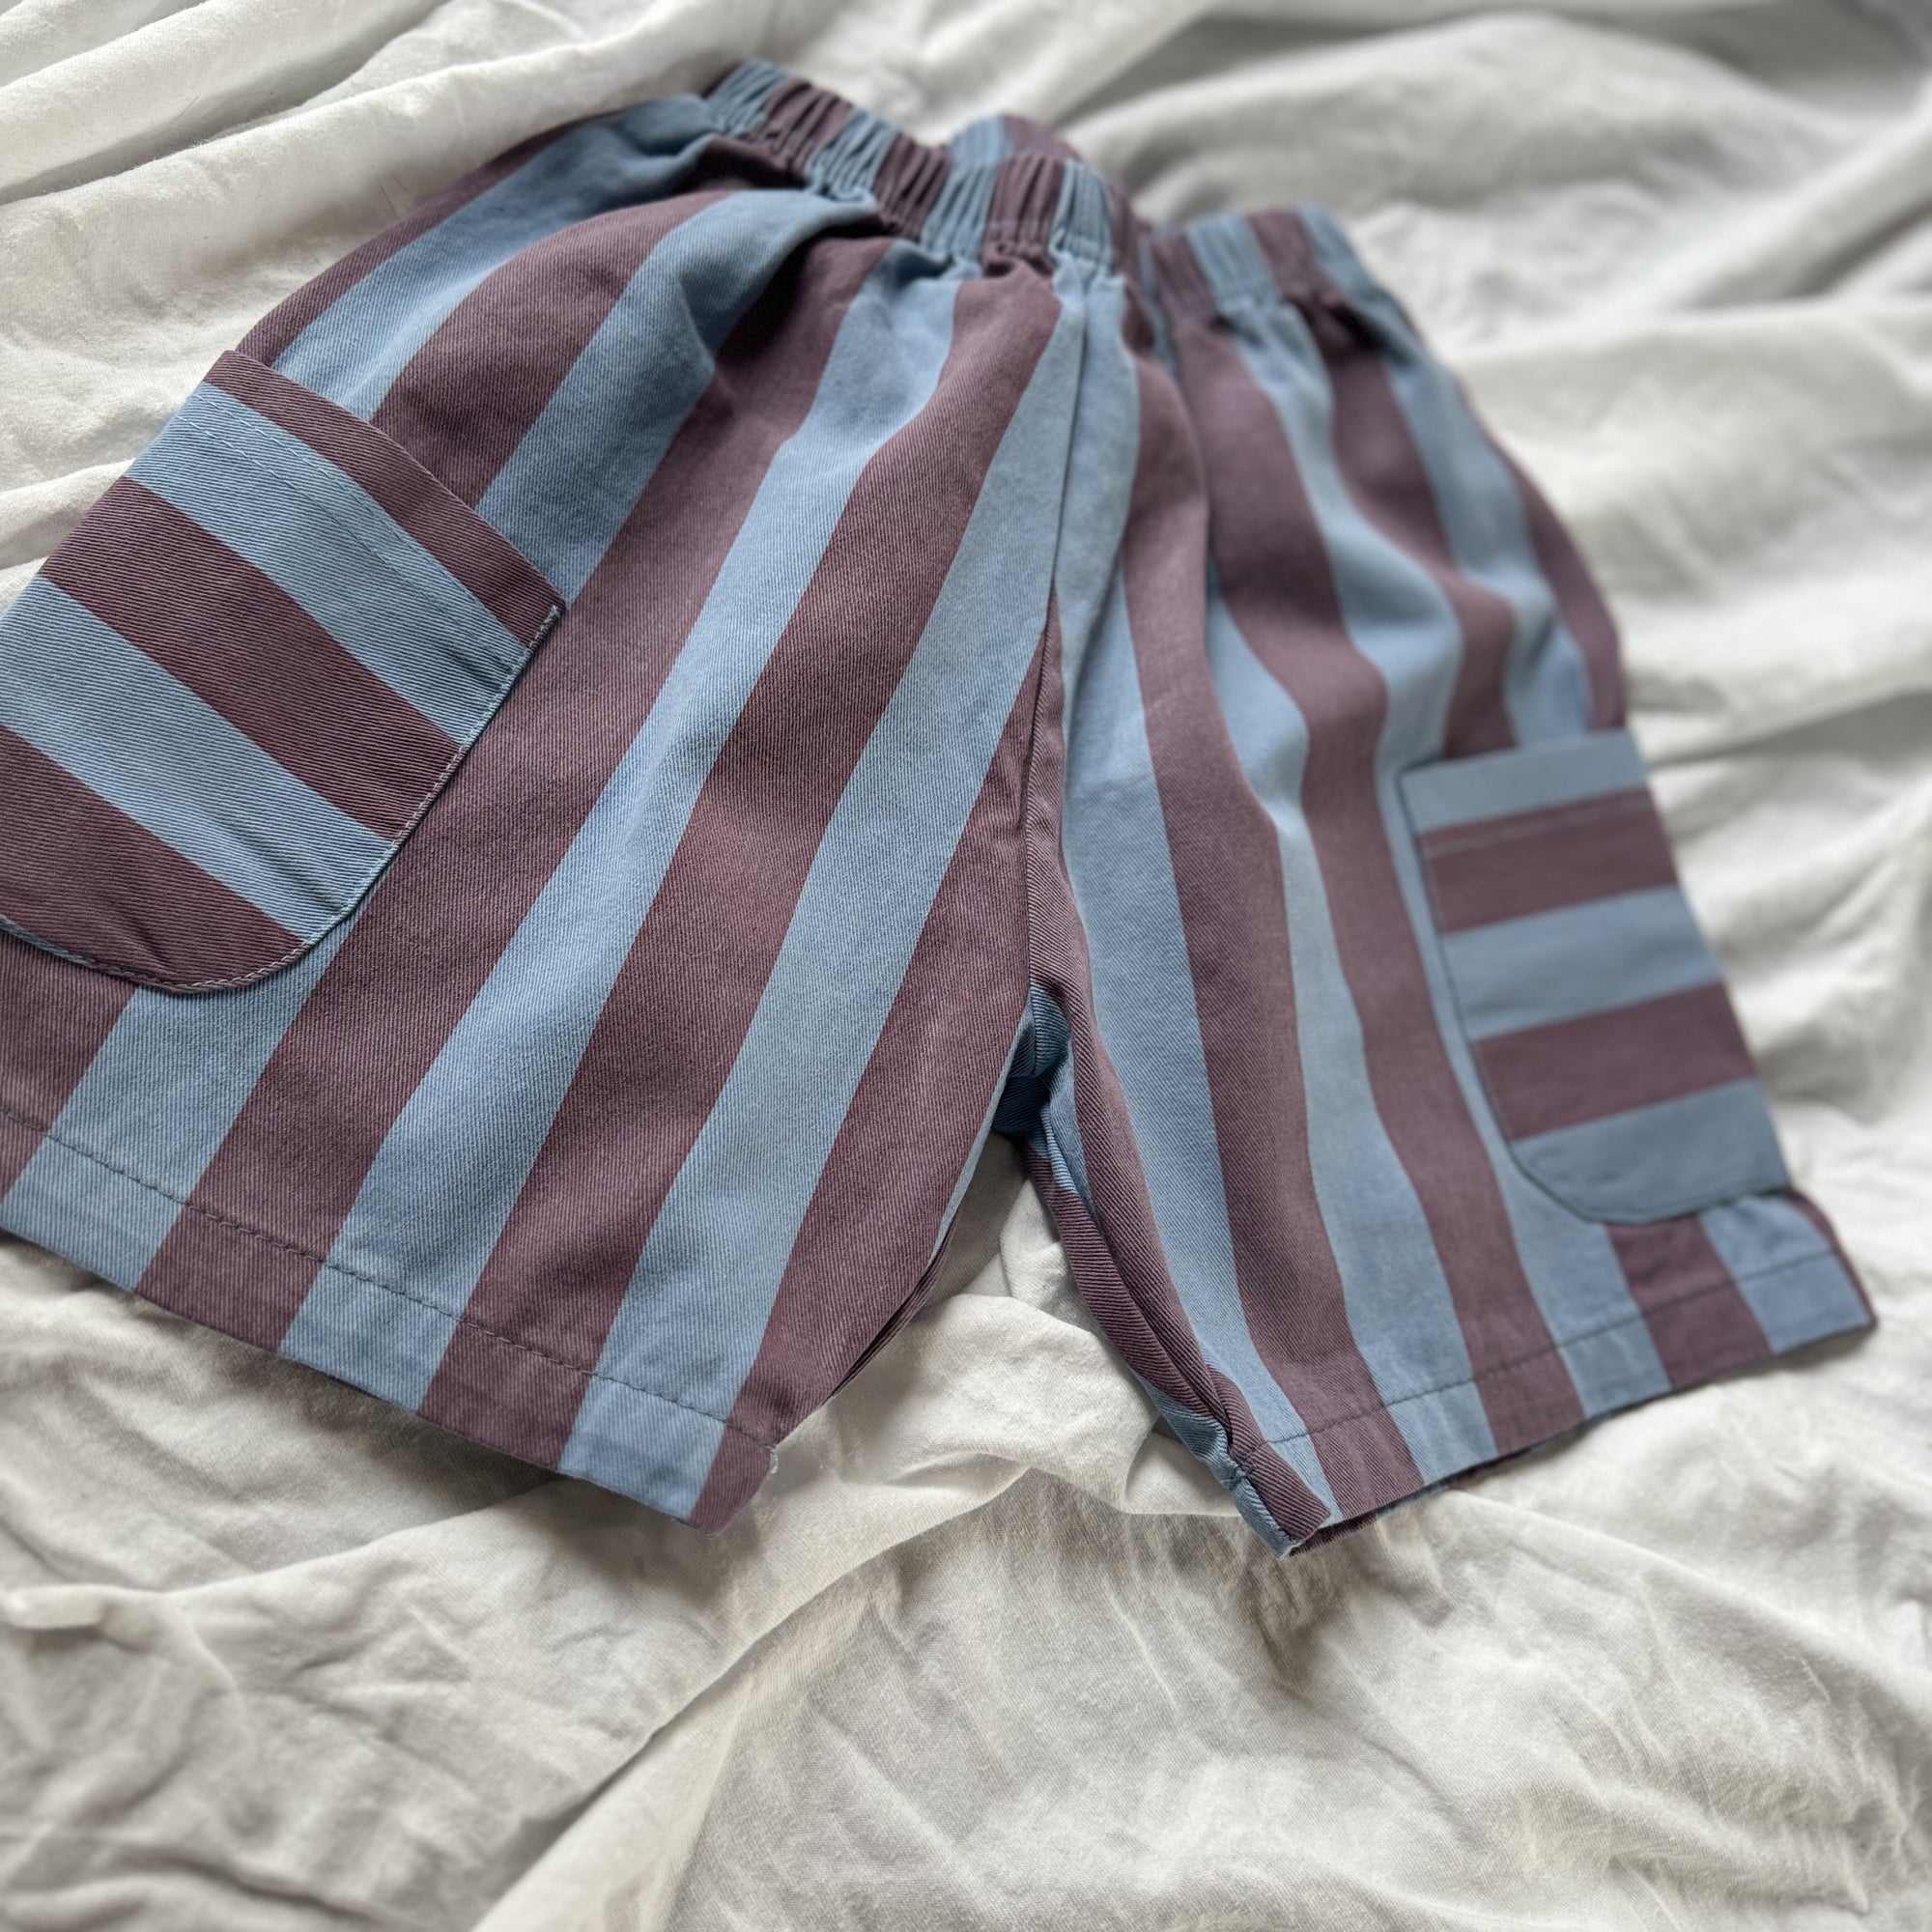 Blue Line Shorts find Stylish Fashion for Little People- at Little Foxx Concept Store